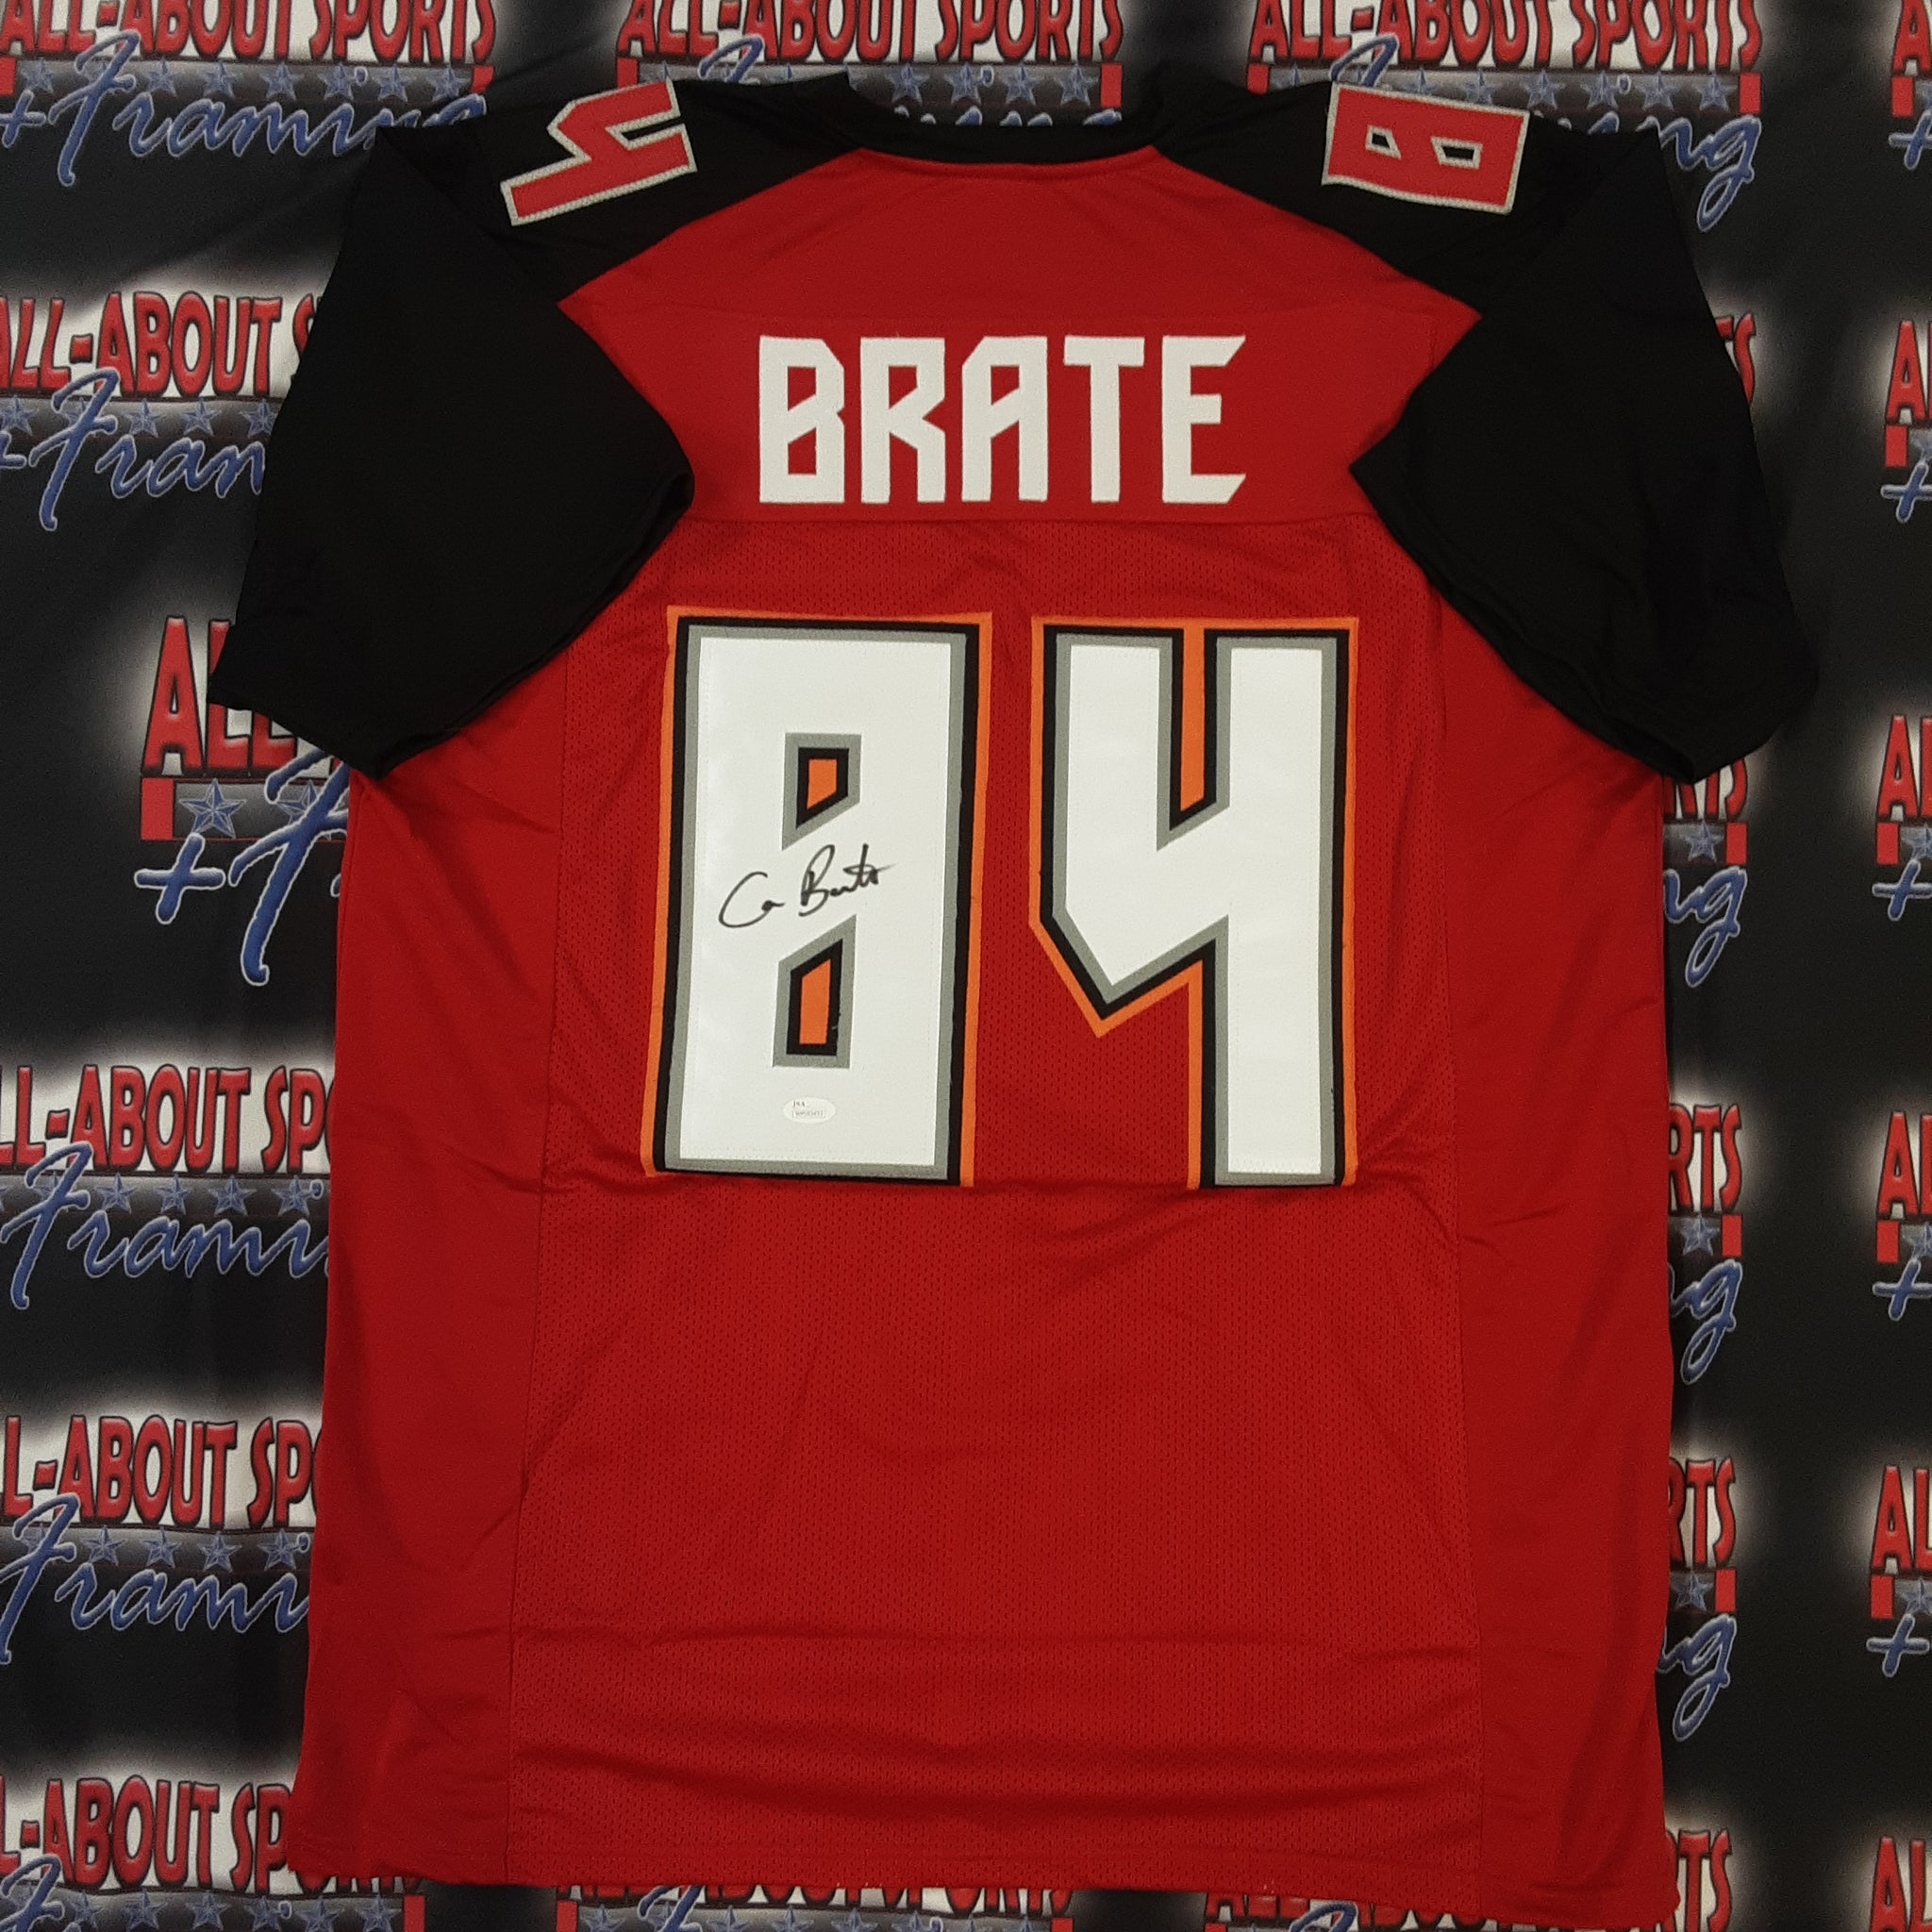 Cameron Brate Authentic Signed Pro Style Jersey Autographed JSA